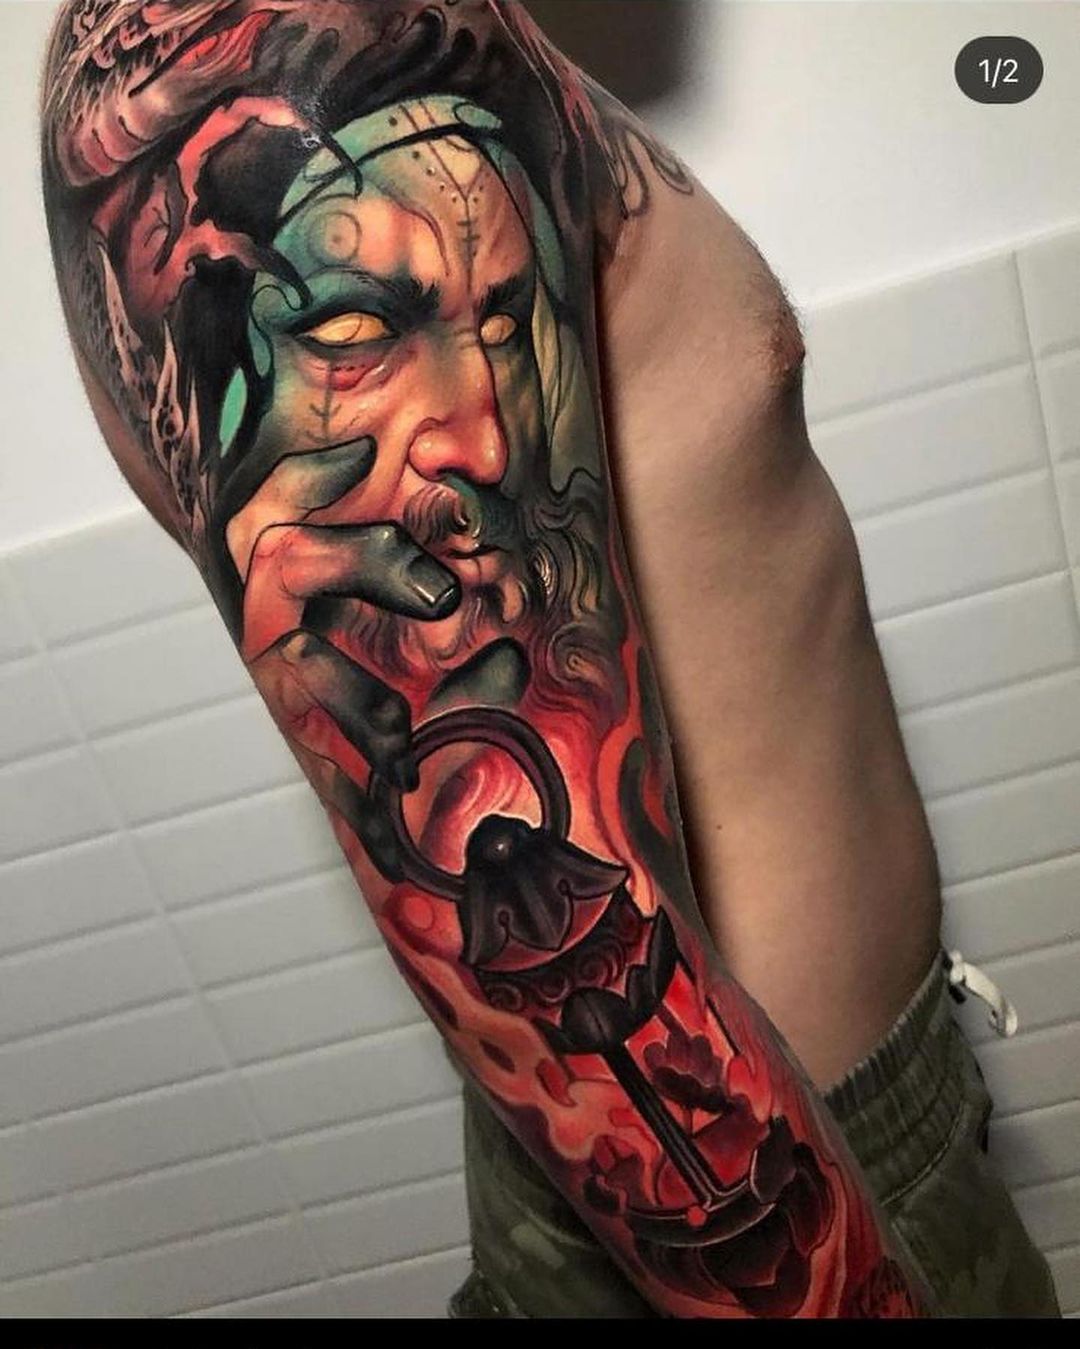 These Tattoos Want to Suck Your Blood  Tattoo Ideas Artists and Models